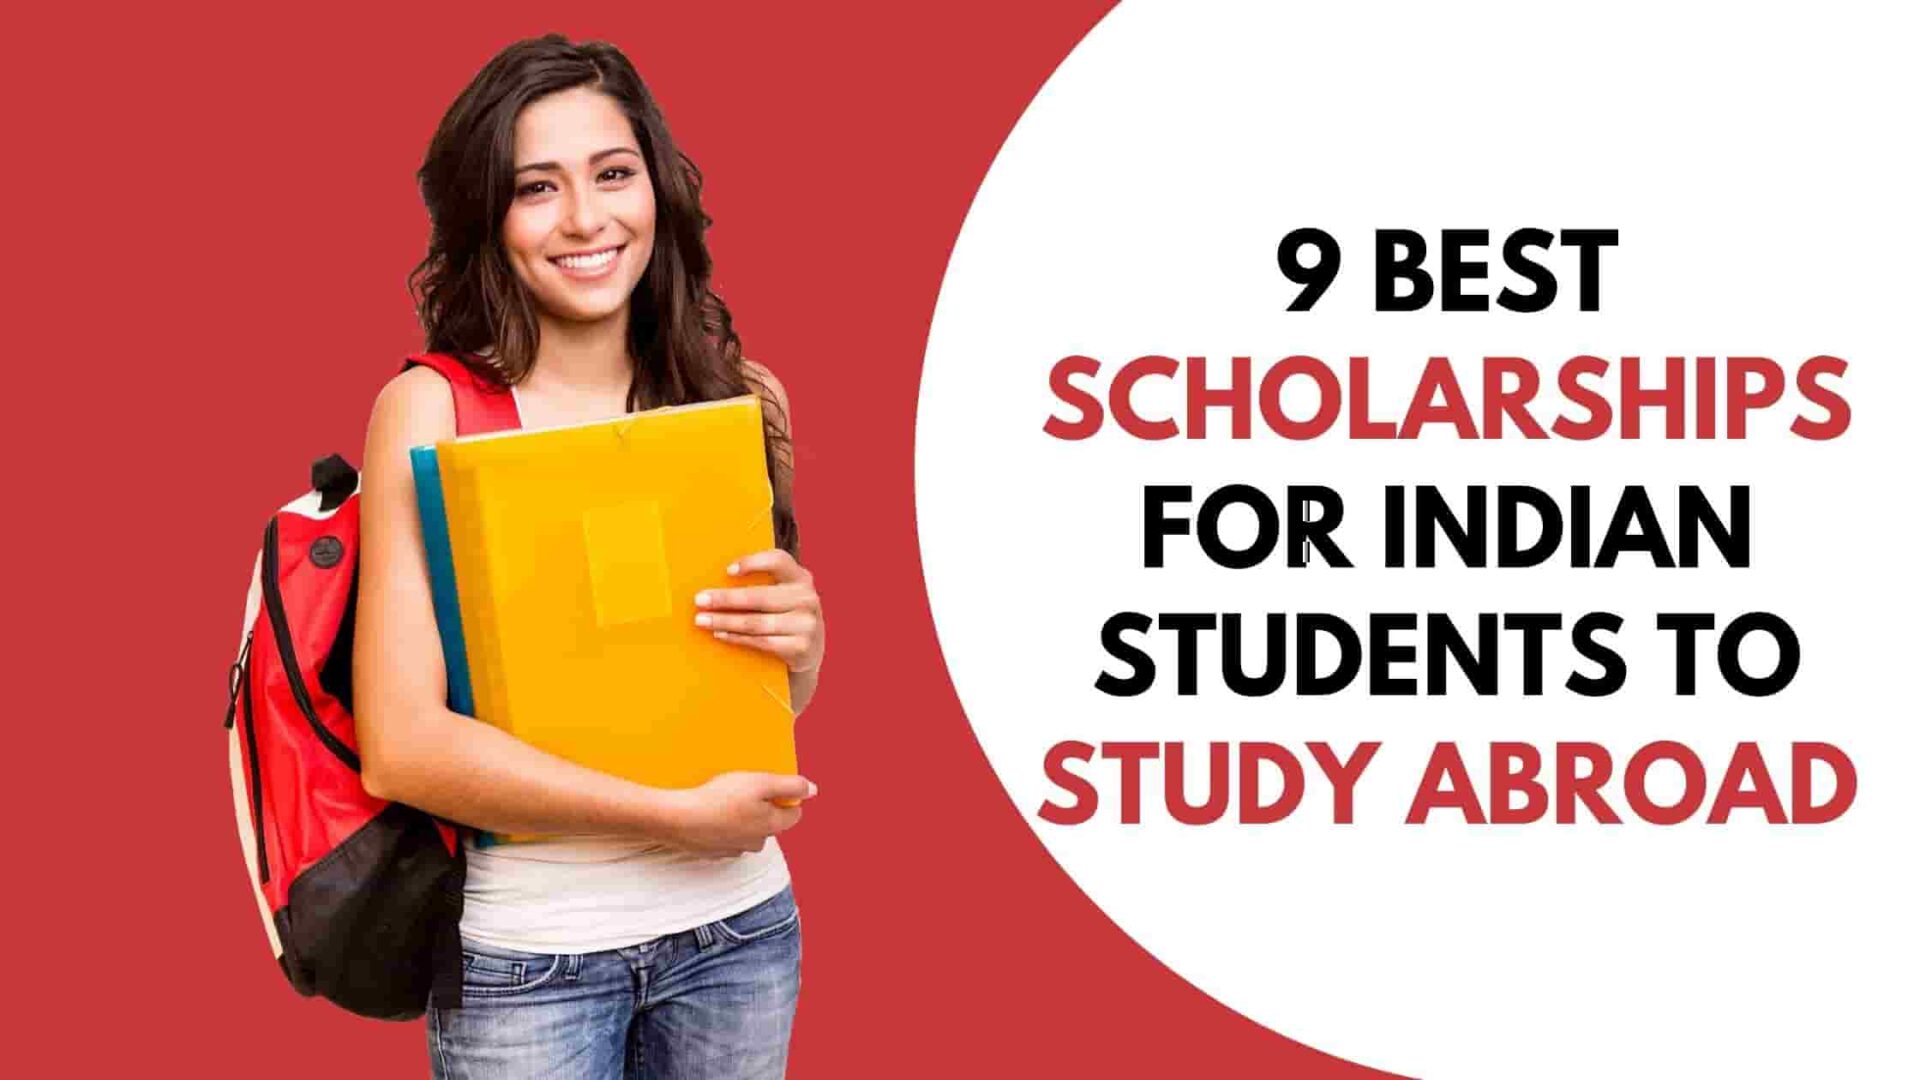 List of Scholarships for Indian Students to Study Abroad